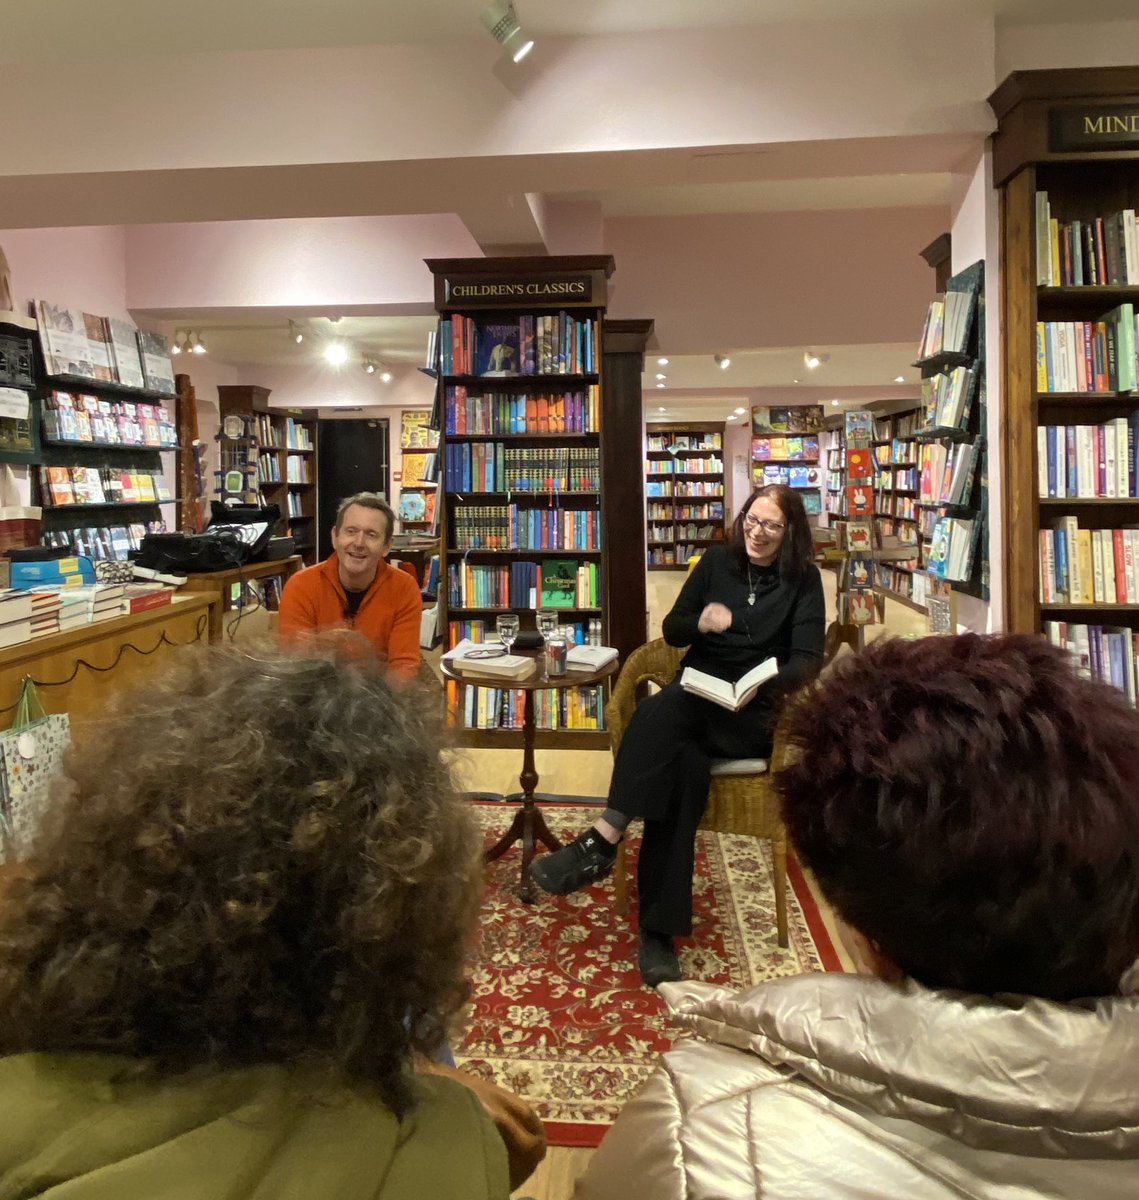 Thank you @Dauntbooks Summertown for letting me interview @RobertDFBooks last night, for the paperback launch of Metamorphosis! Look what a great time I had. Everyone should get this book, to change the way they live and read